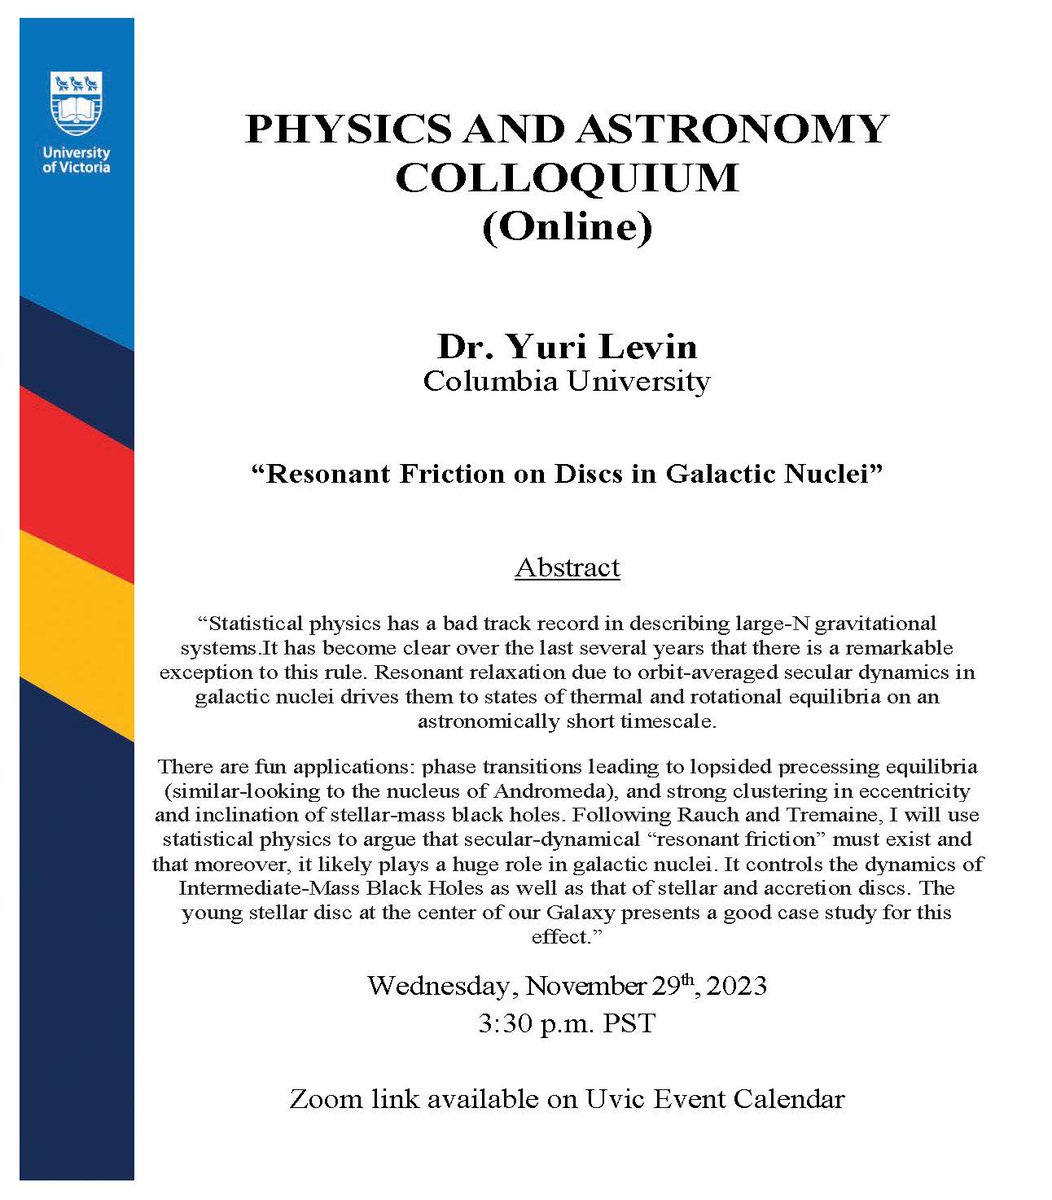 COLLOQUIUM (Online): Dr. Yuri Levin, Columbia University, will be giving an online colloquium on Wednesday November 29th at 3:30pm PST over Zoom. For more information: events.uvic.ca/physics/event/…